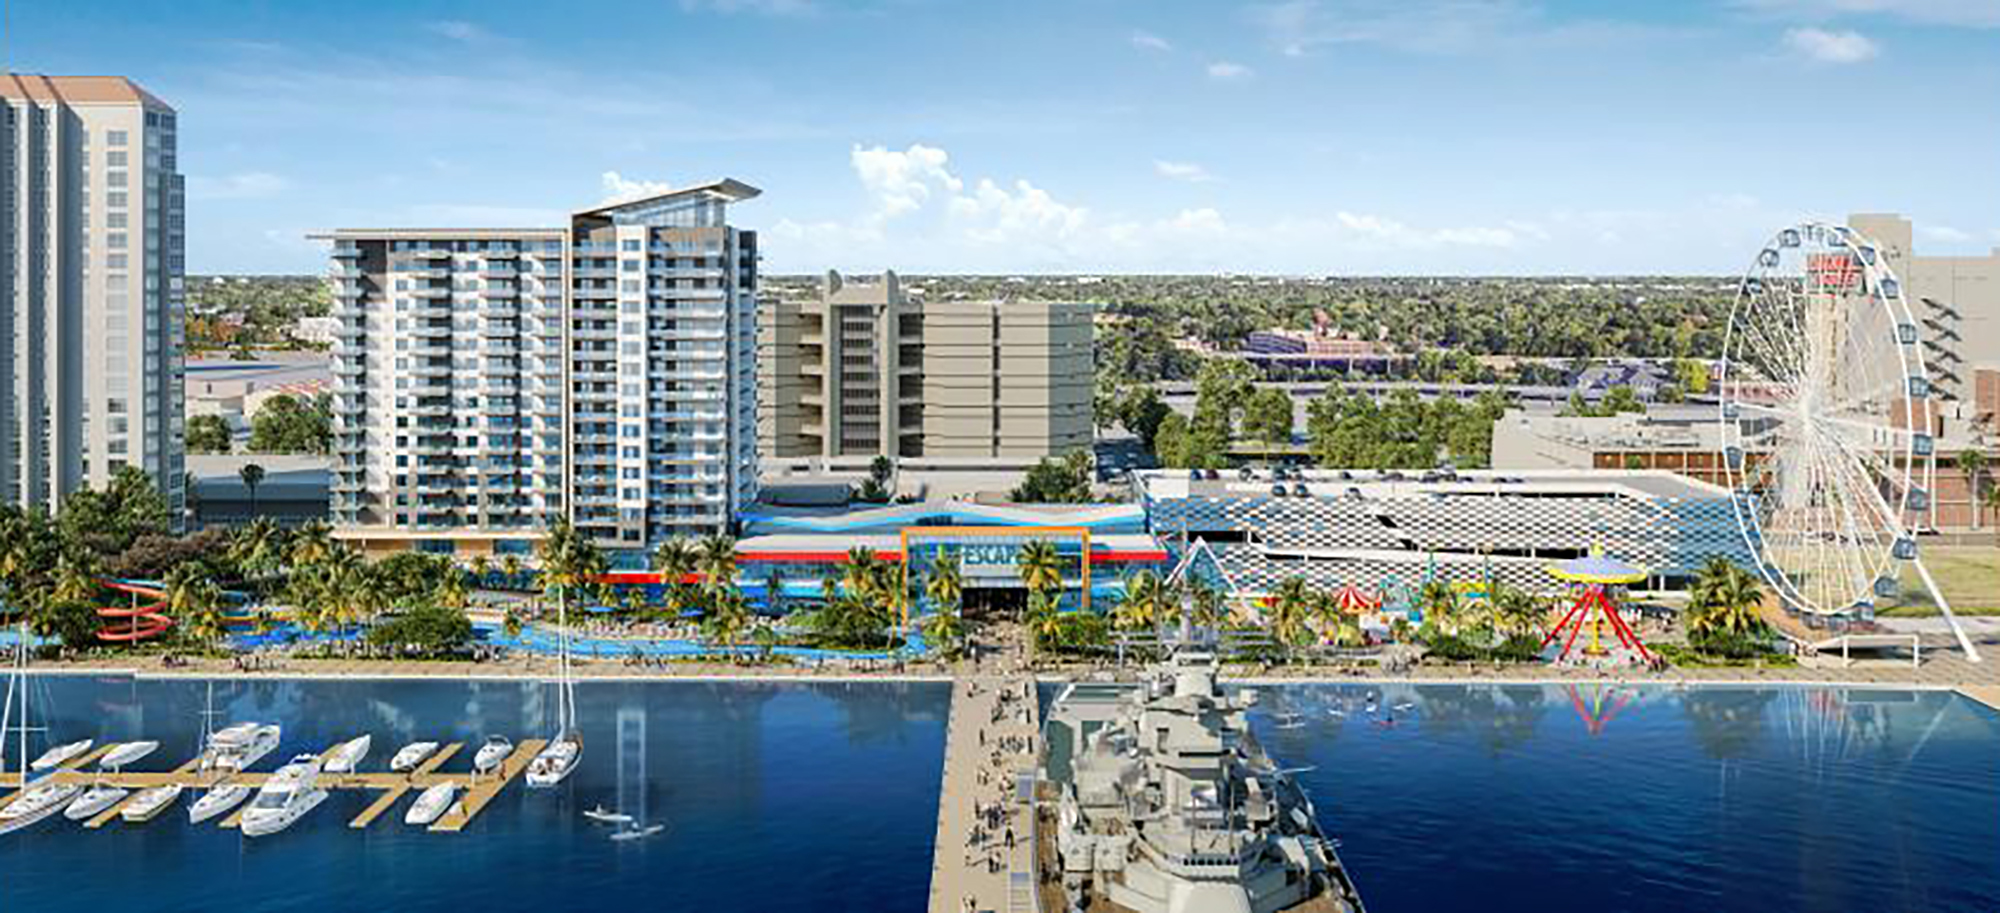 Renderings of the resort show a marina and a spot for the USS Charles F. Adams naval ship museum.